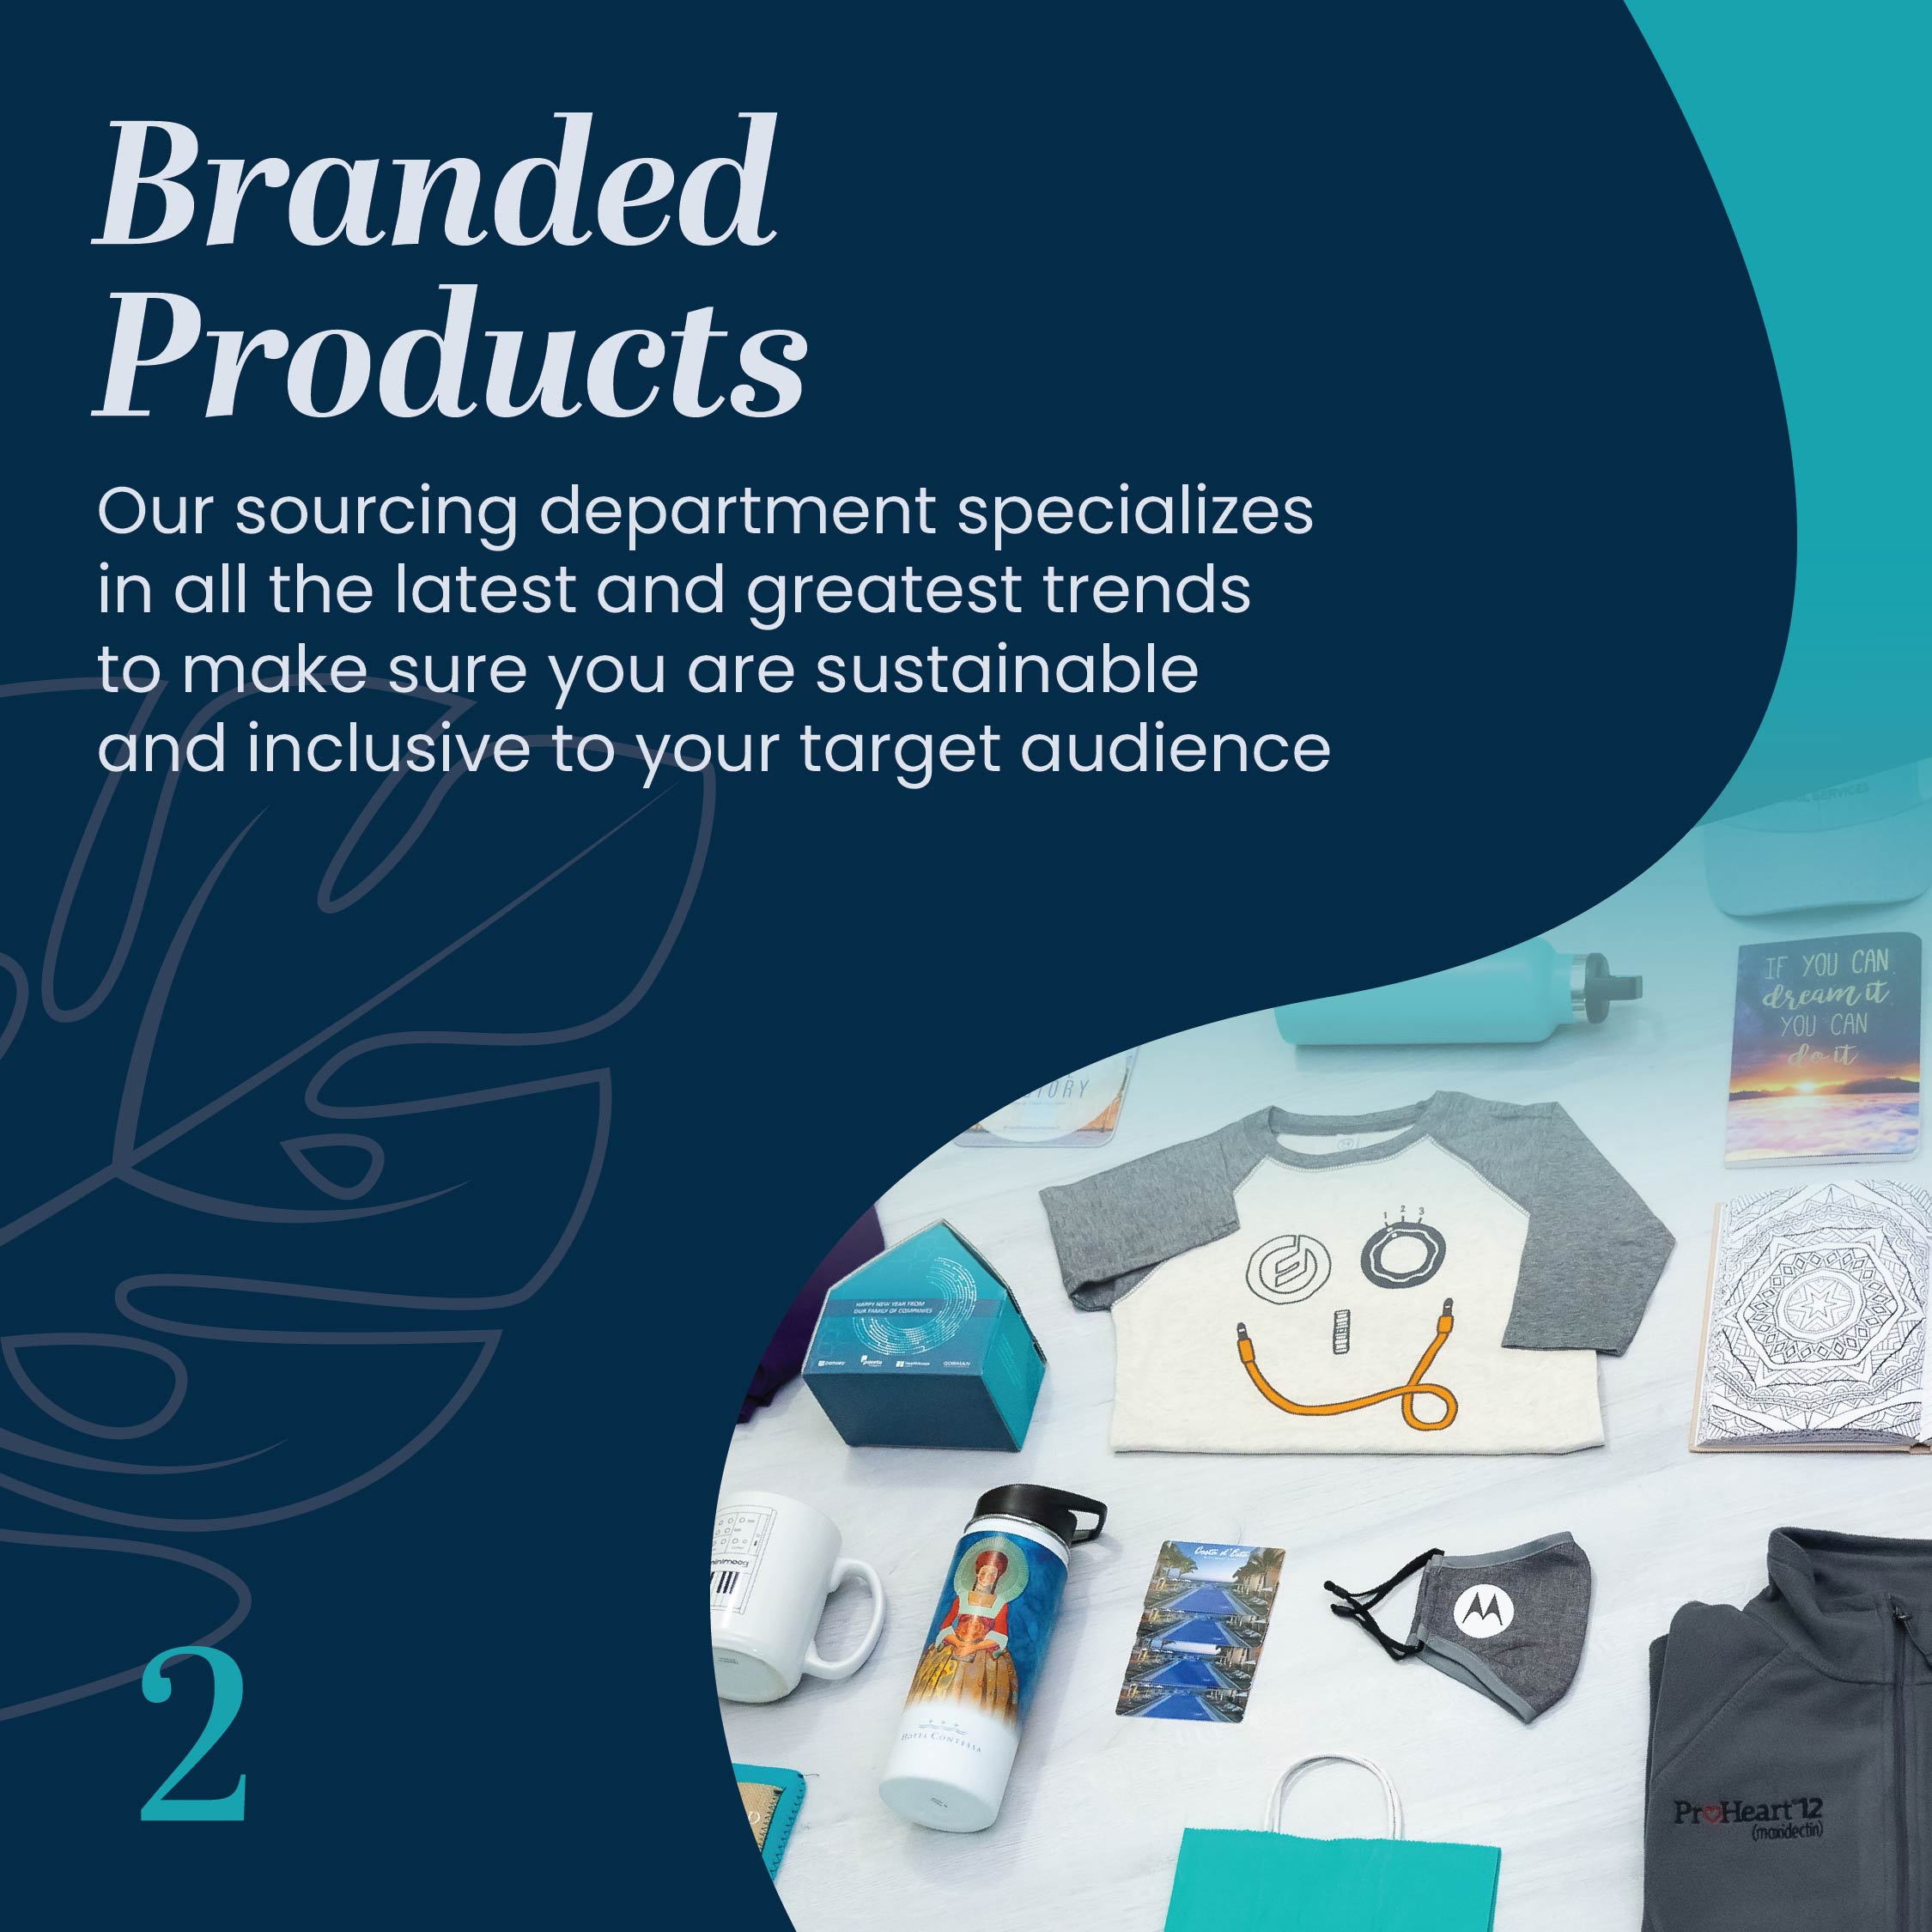 Branded Products